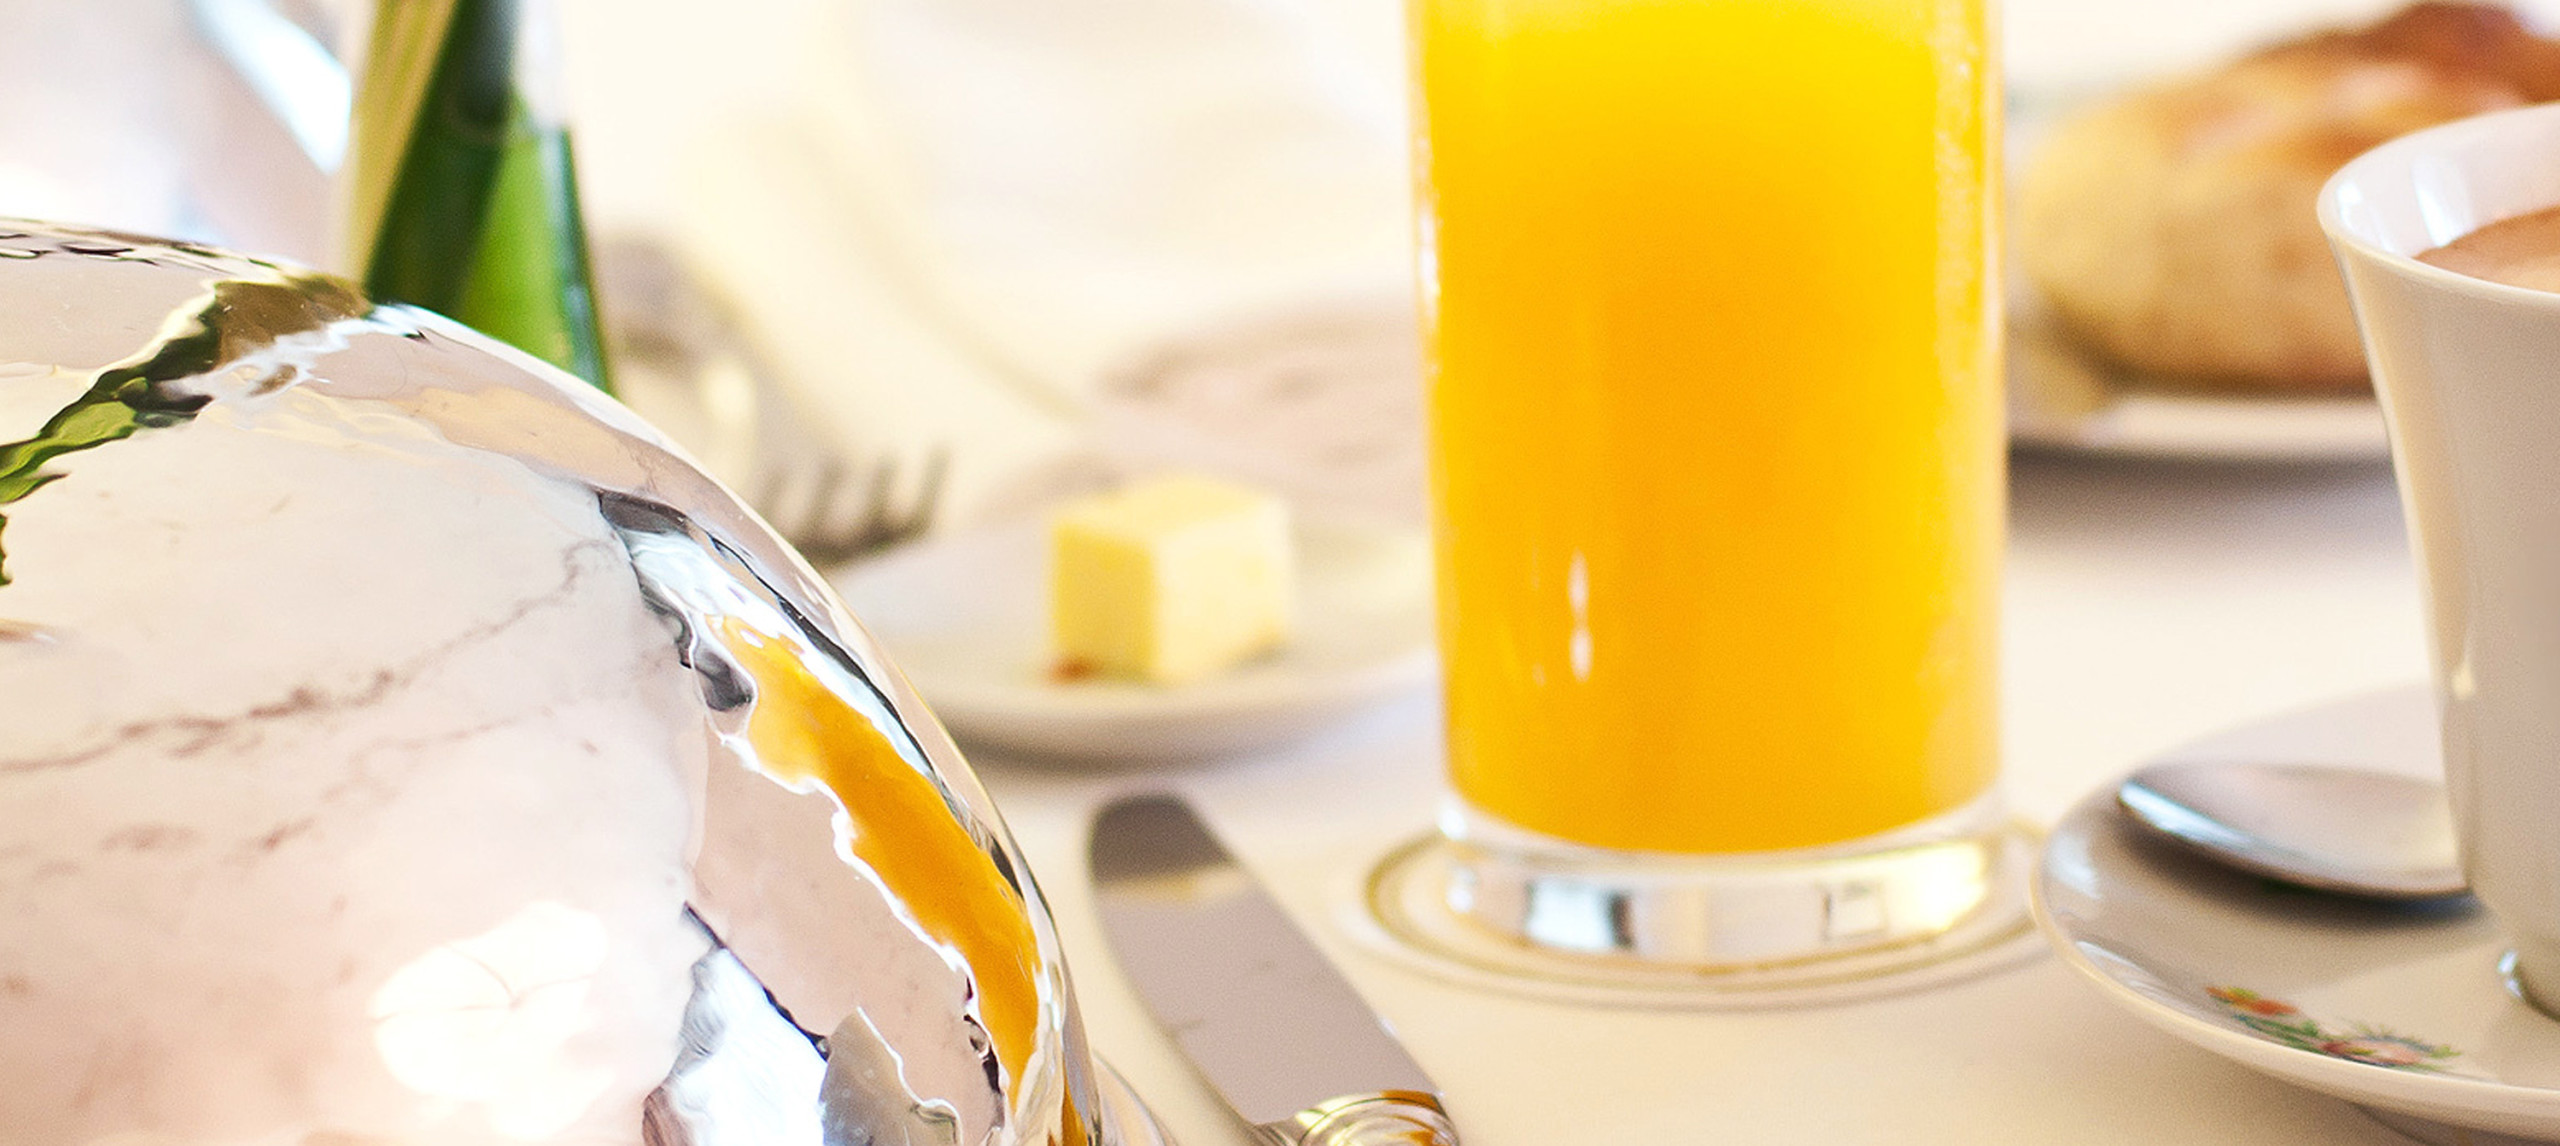 Close Up of Glass of Orange Juice on Dining Table